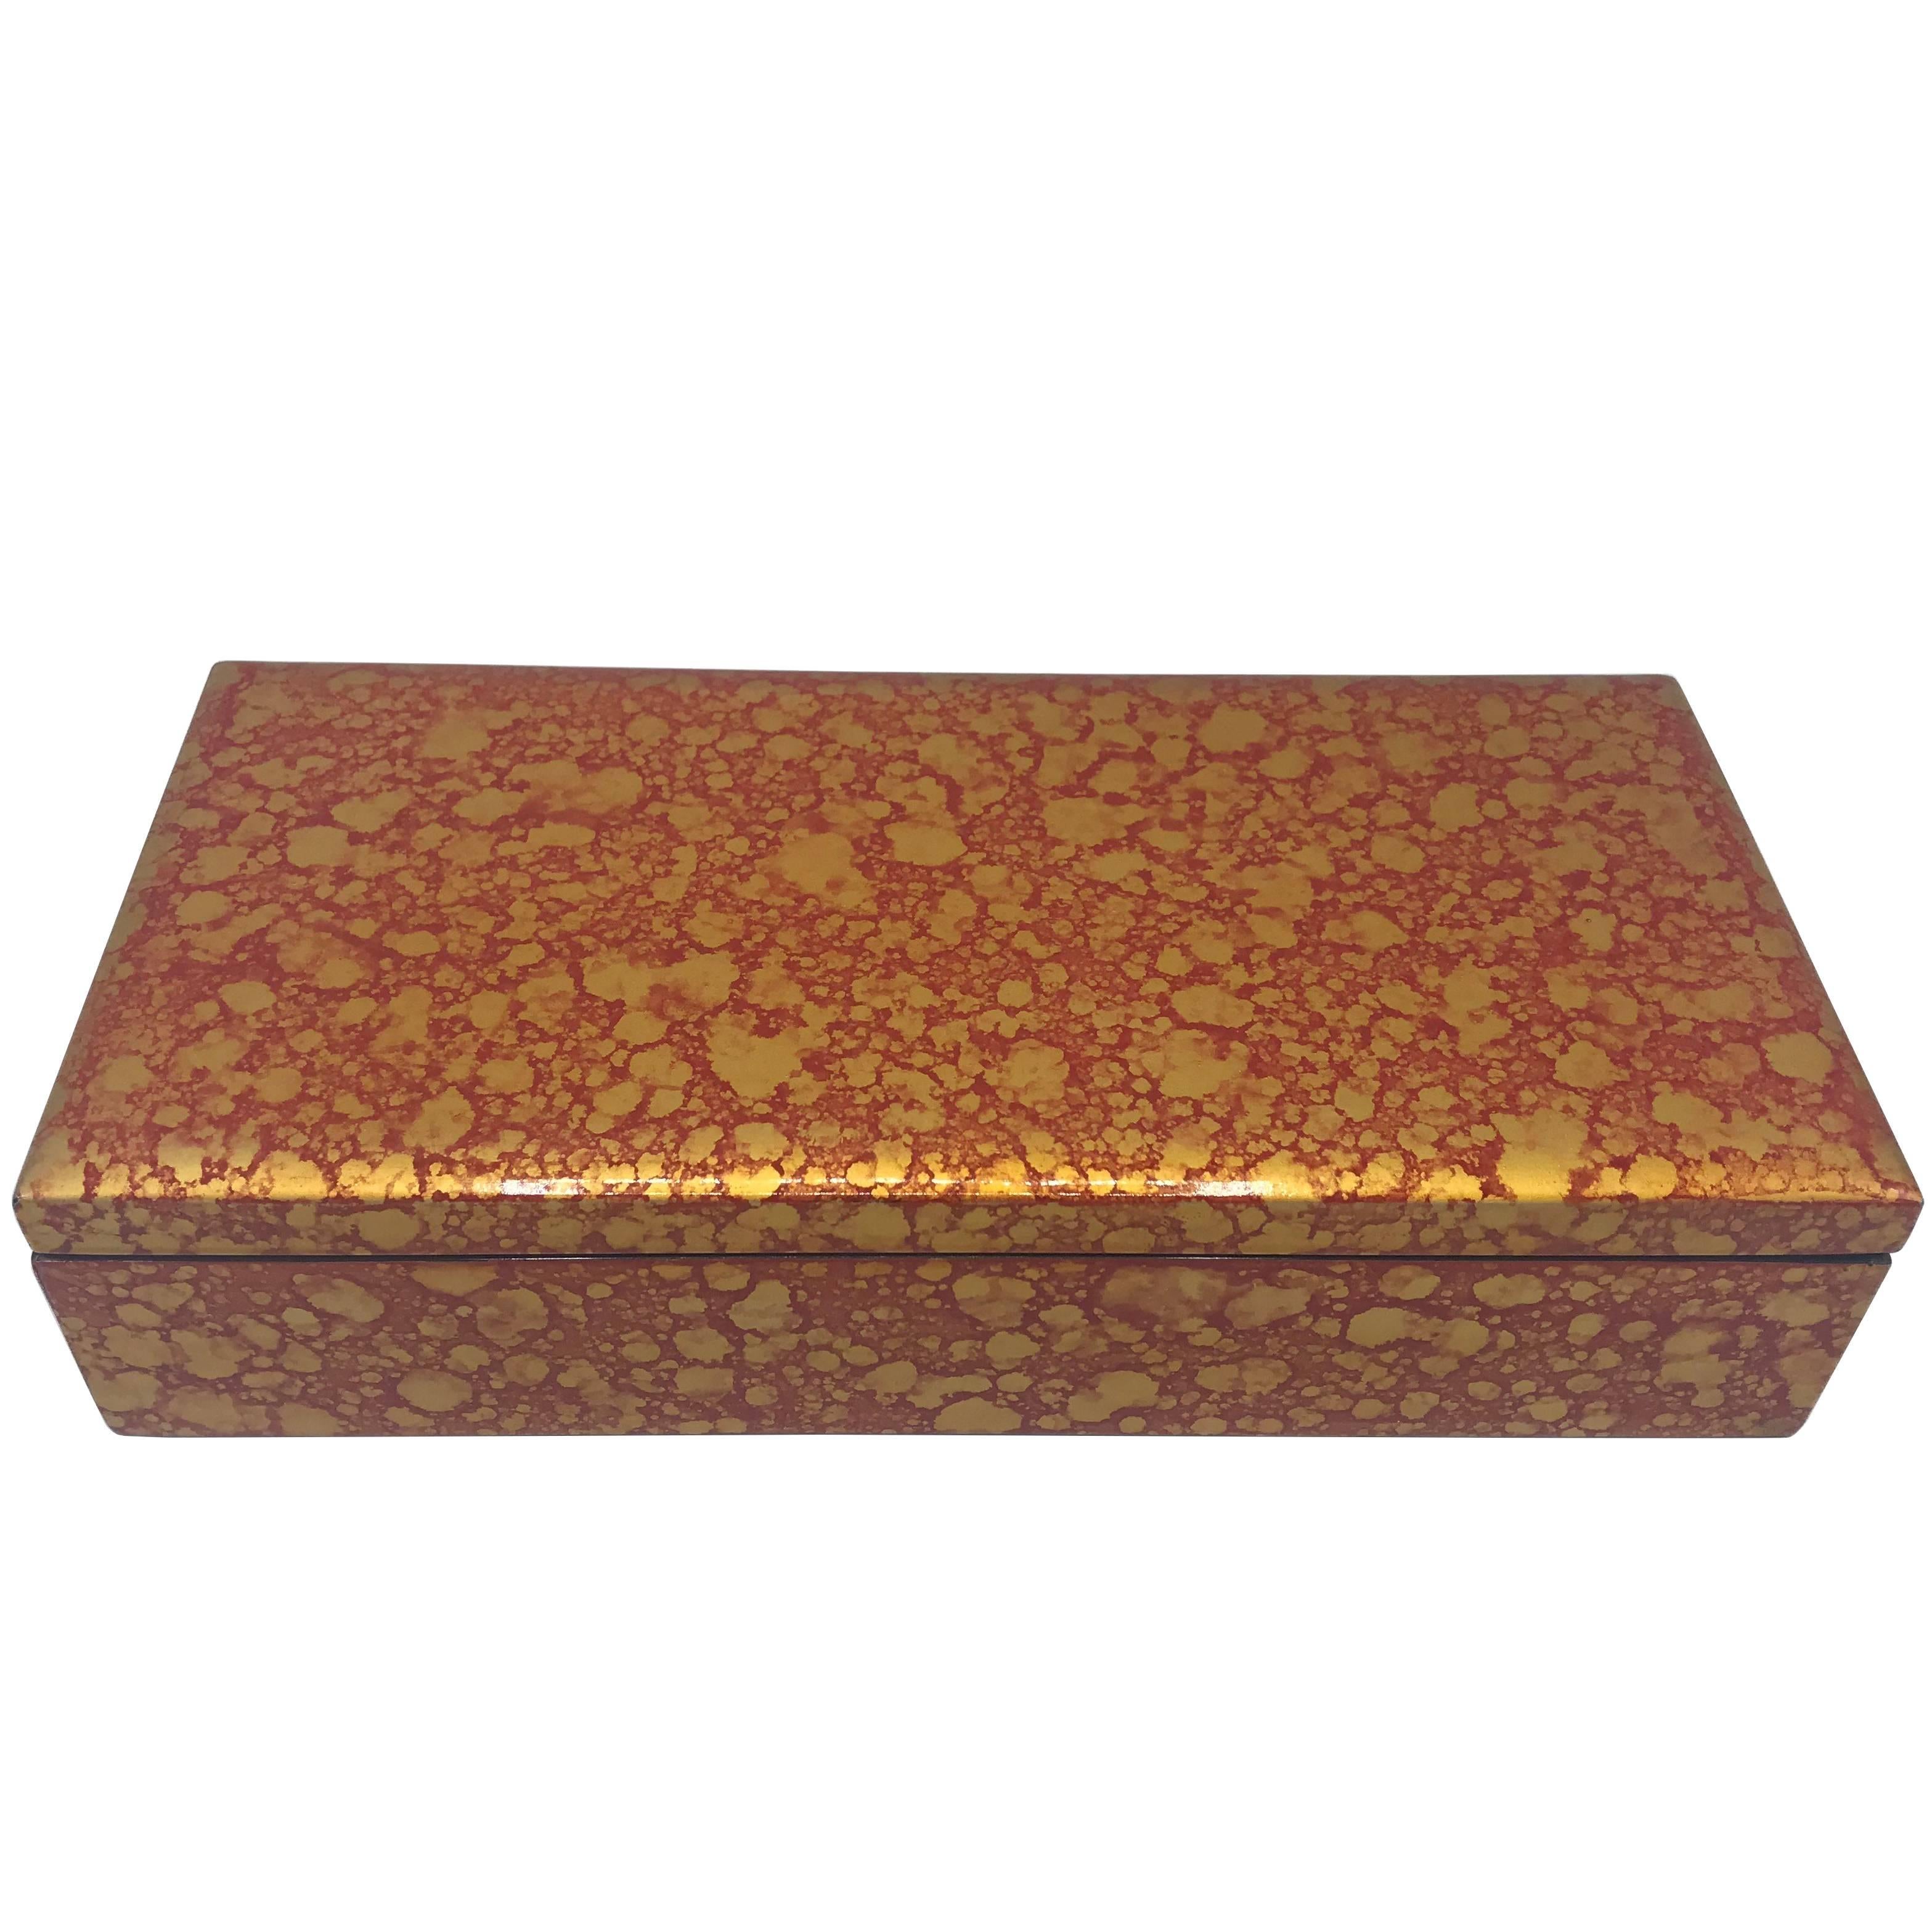 1970s Chinese Red and Gold Lacquered Box